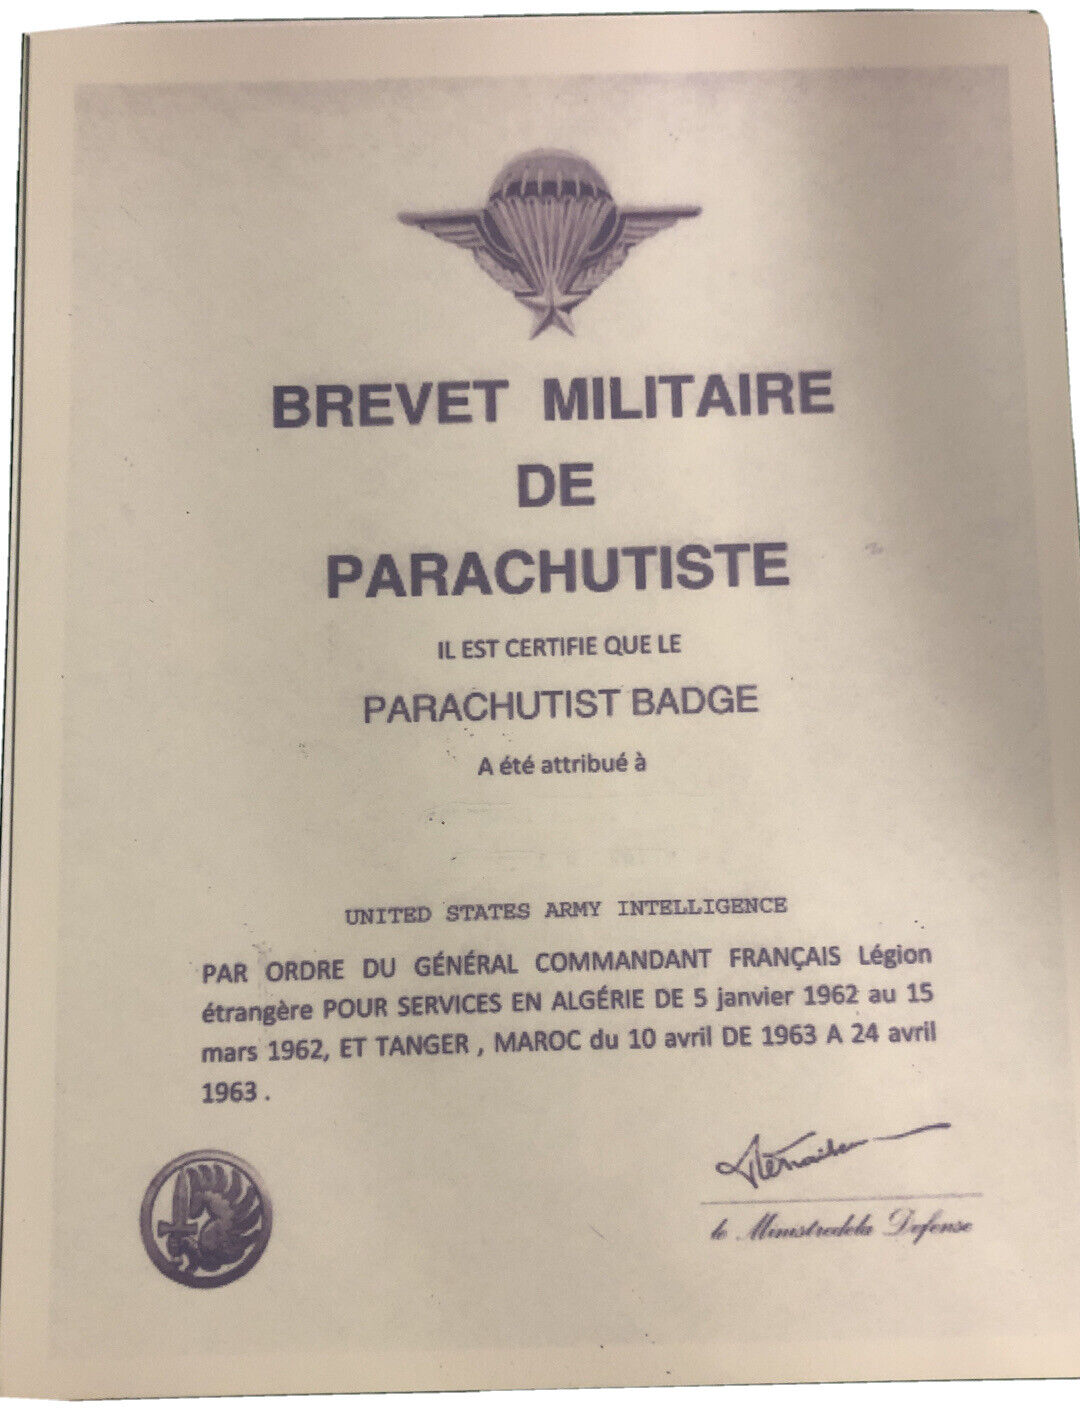 FRENCH FOREIGN LEGION 2ND REP PARACHUTE AWARD CERTIFICATE AIRBORNE BLANK